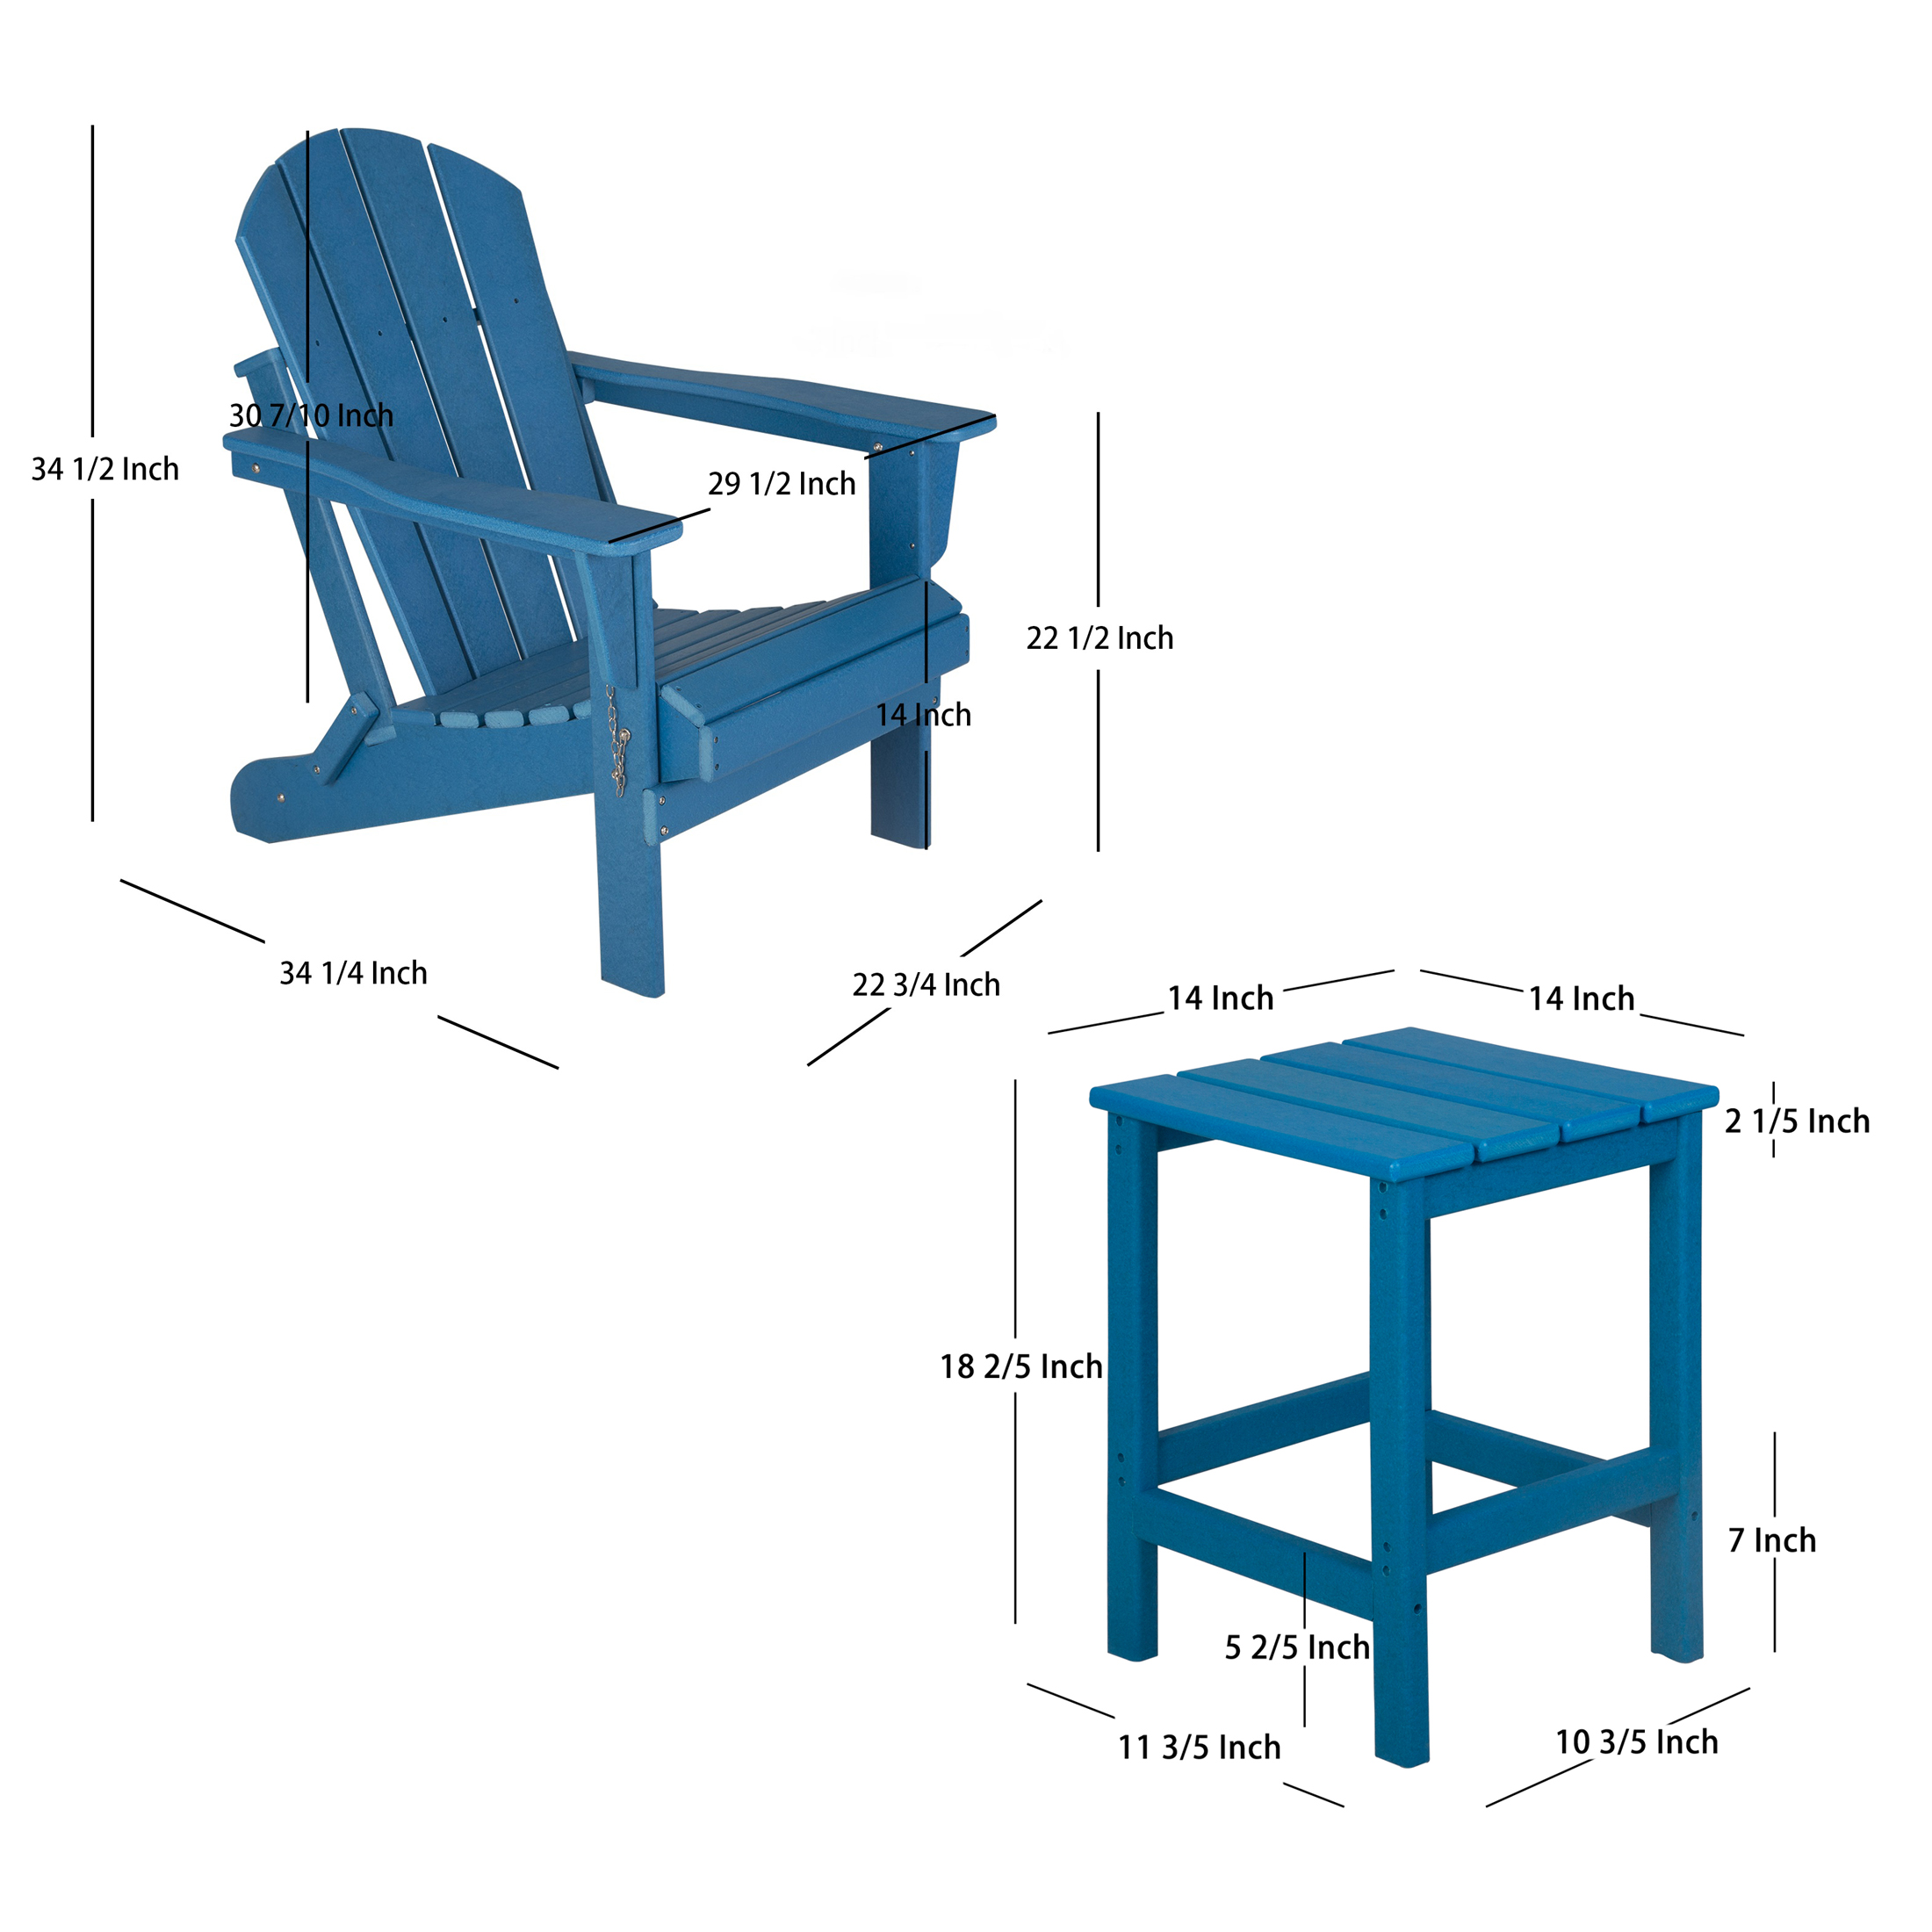 WestinTrends Malibu 2-Pieces Adirondack Chair Set with Side Table, All Weather Outdoor Seating Plastic Patio Lawn Chair Folding for Outside Porch Deck Backyard, Teak - image 3 of 7